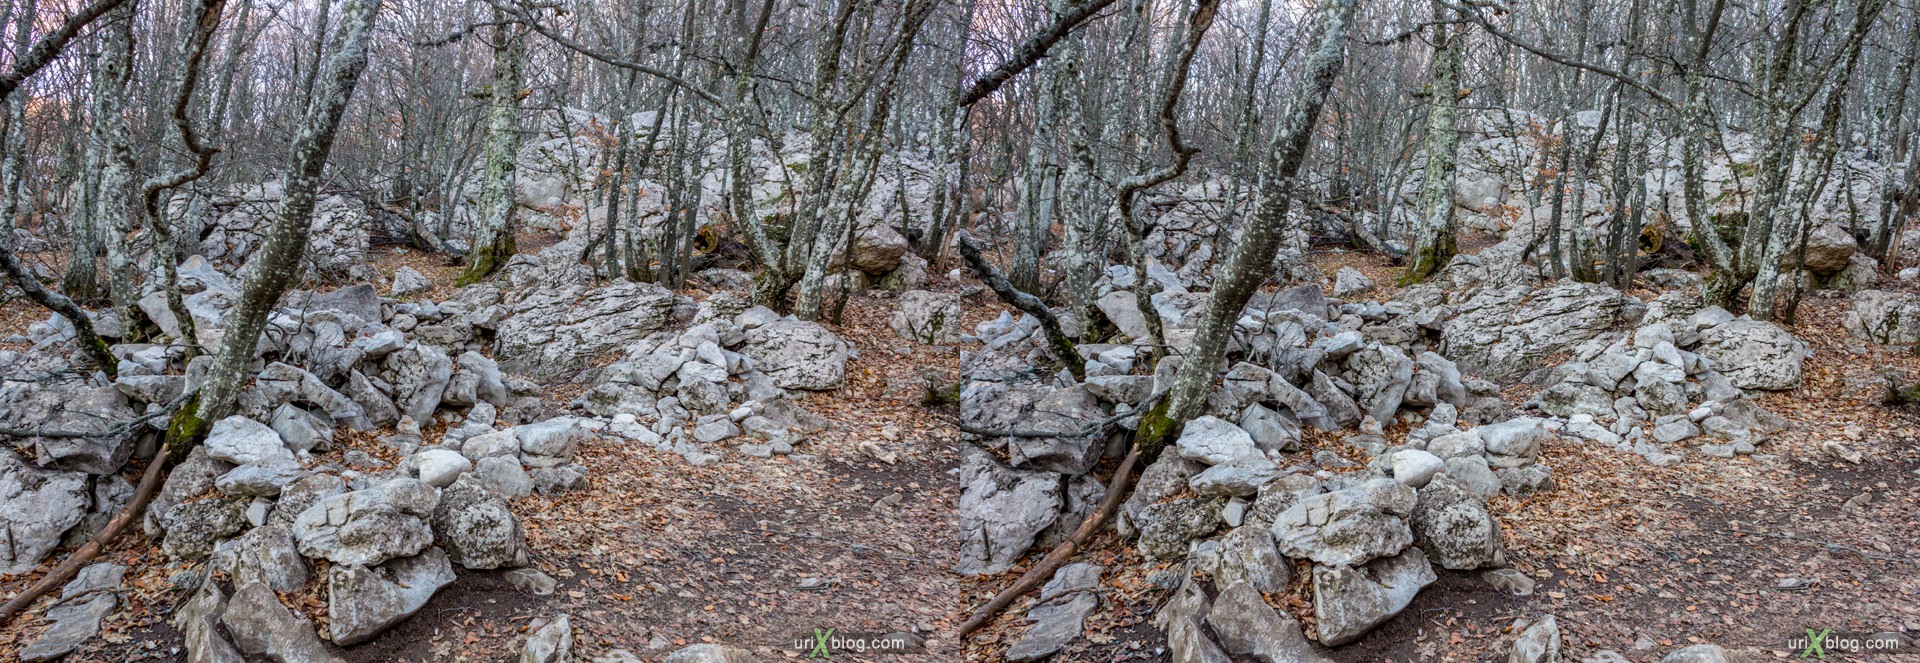 2012, Ai-Petri, mountains, Crimea, Russia, Ukraine, forest, winter, 3D, stereo pair, cross-eyed, crossview, cross view stereo pair, stereoscopic